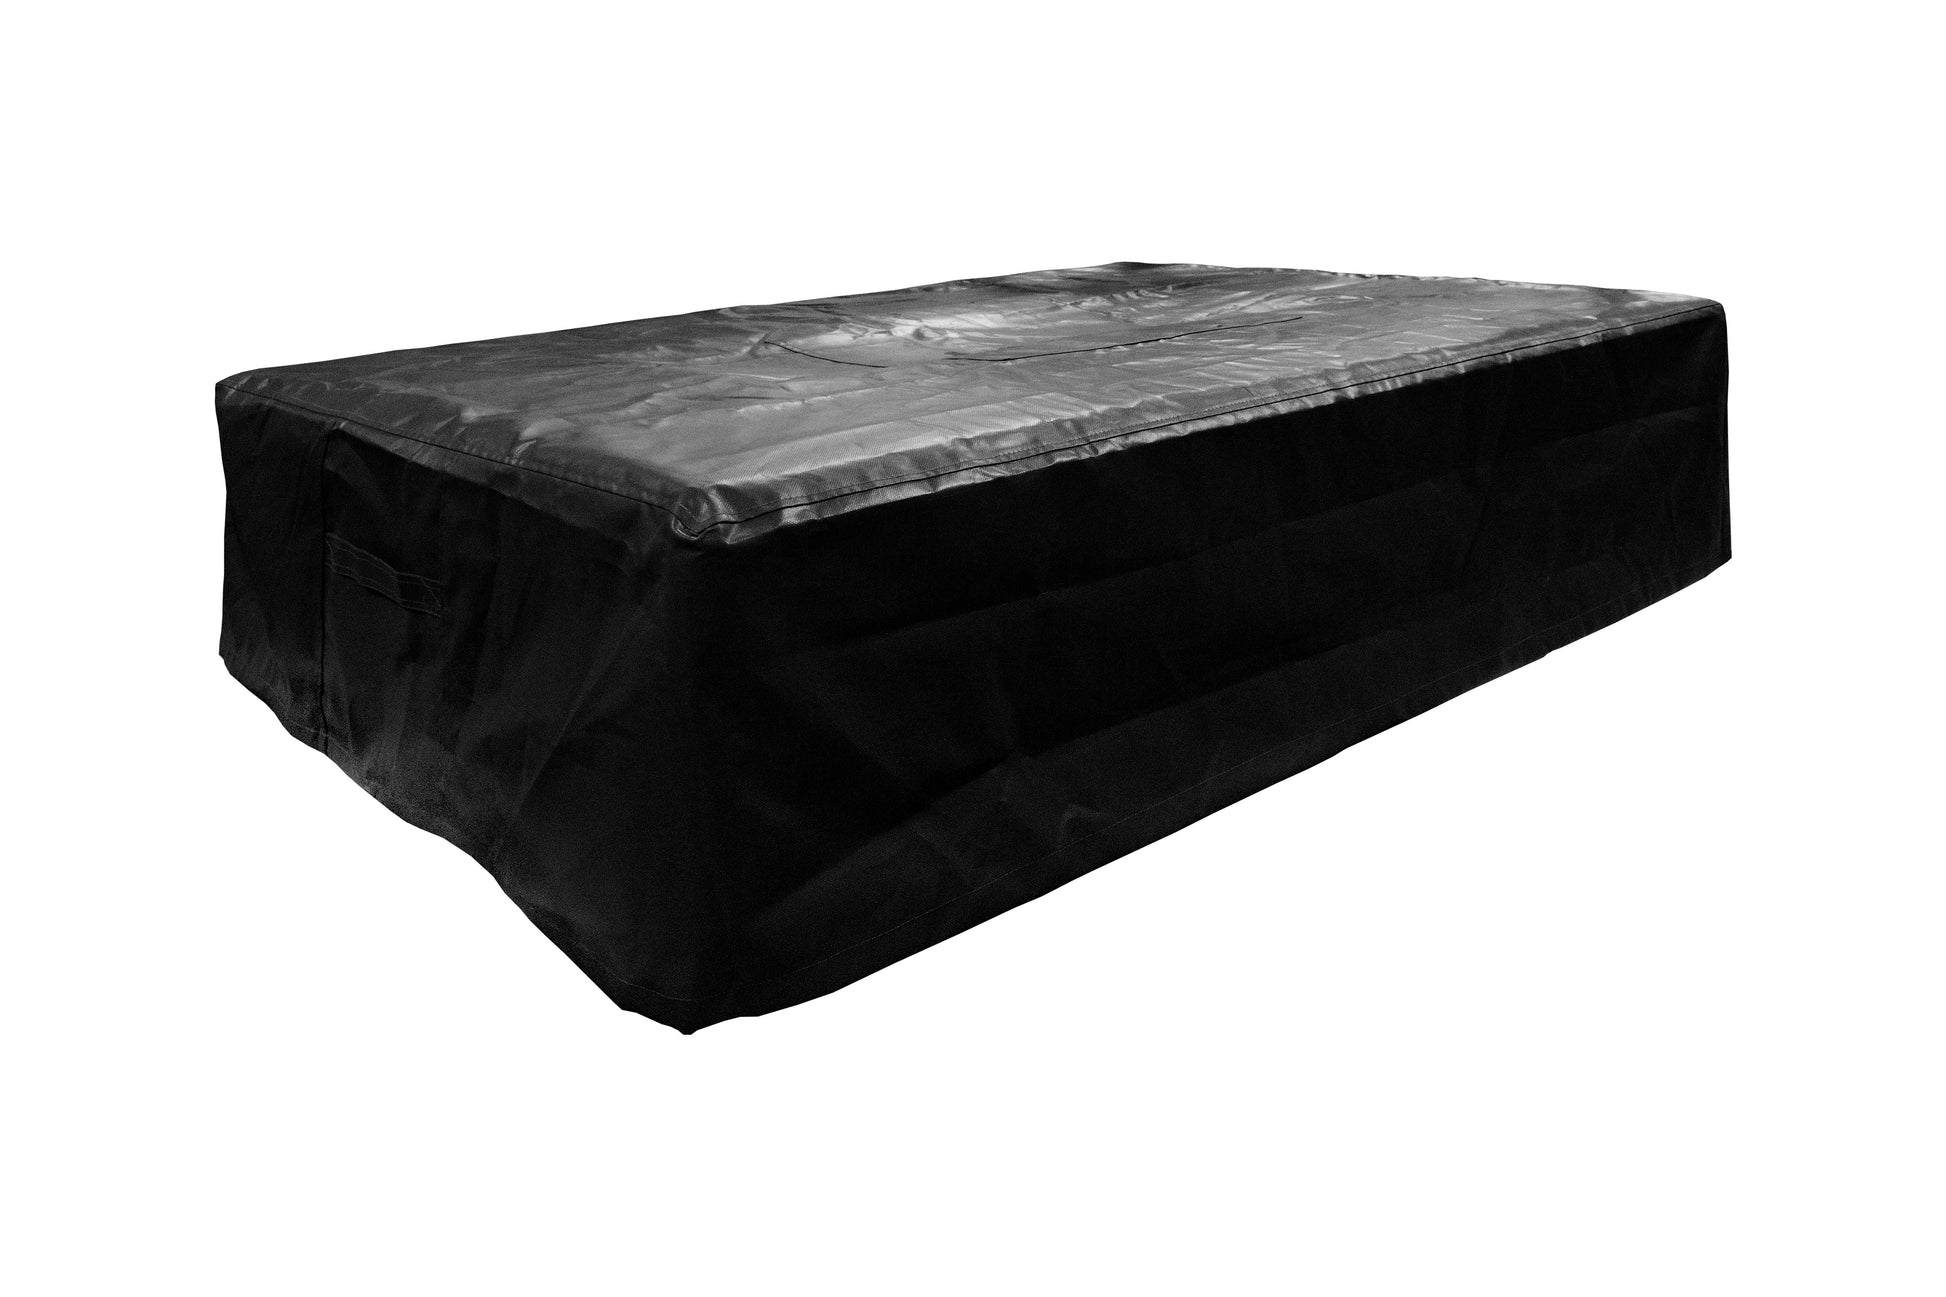 Firegear Pro Series Sanctuary 1 56" Slate Rectangular Natural Gas Fire Table With All Weather Electronic Ignition System